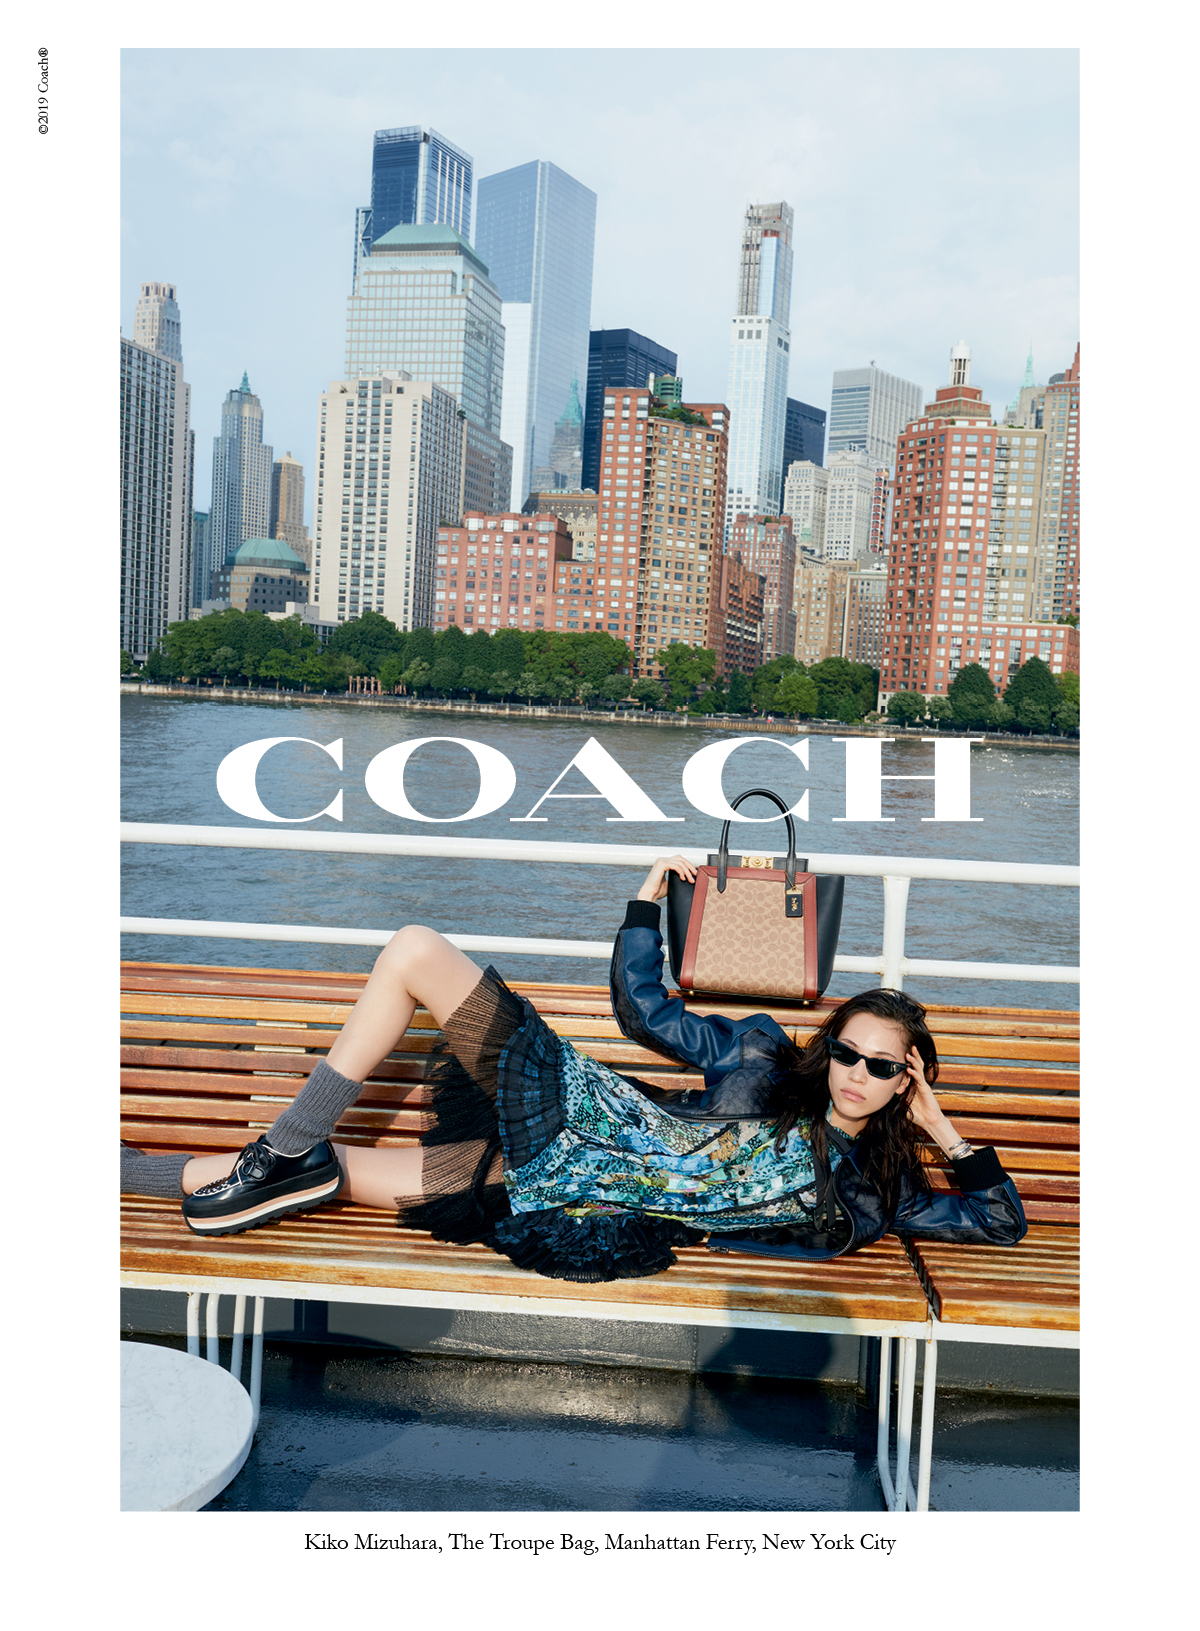 Coach owner Tapestry raises annual profit forecast